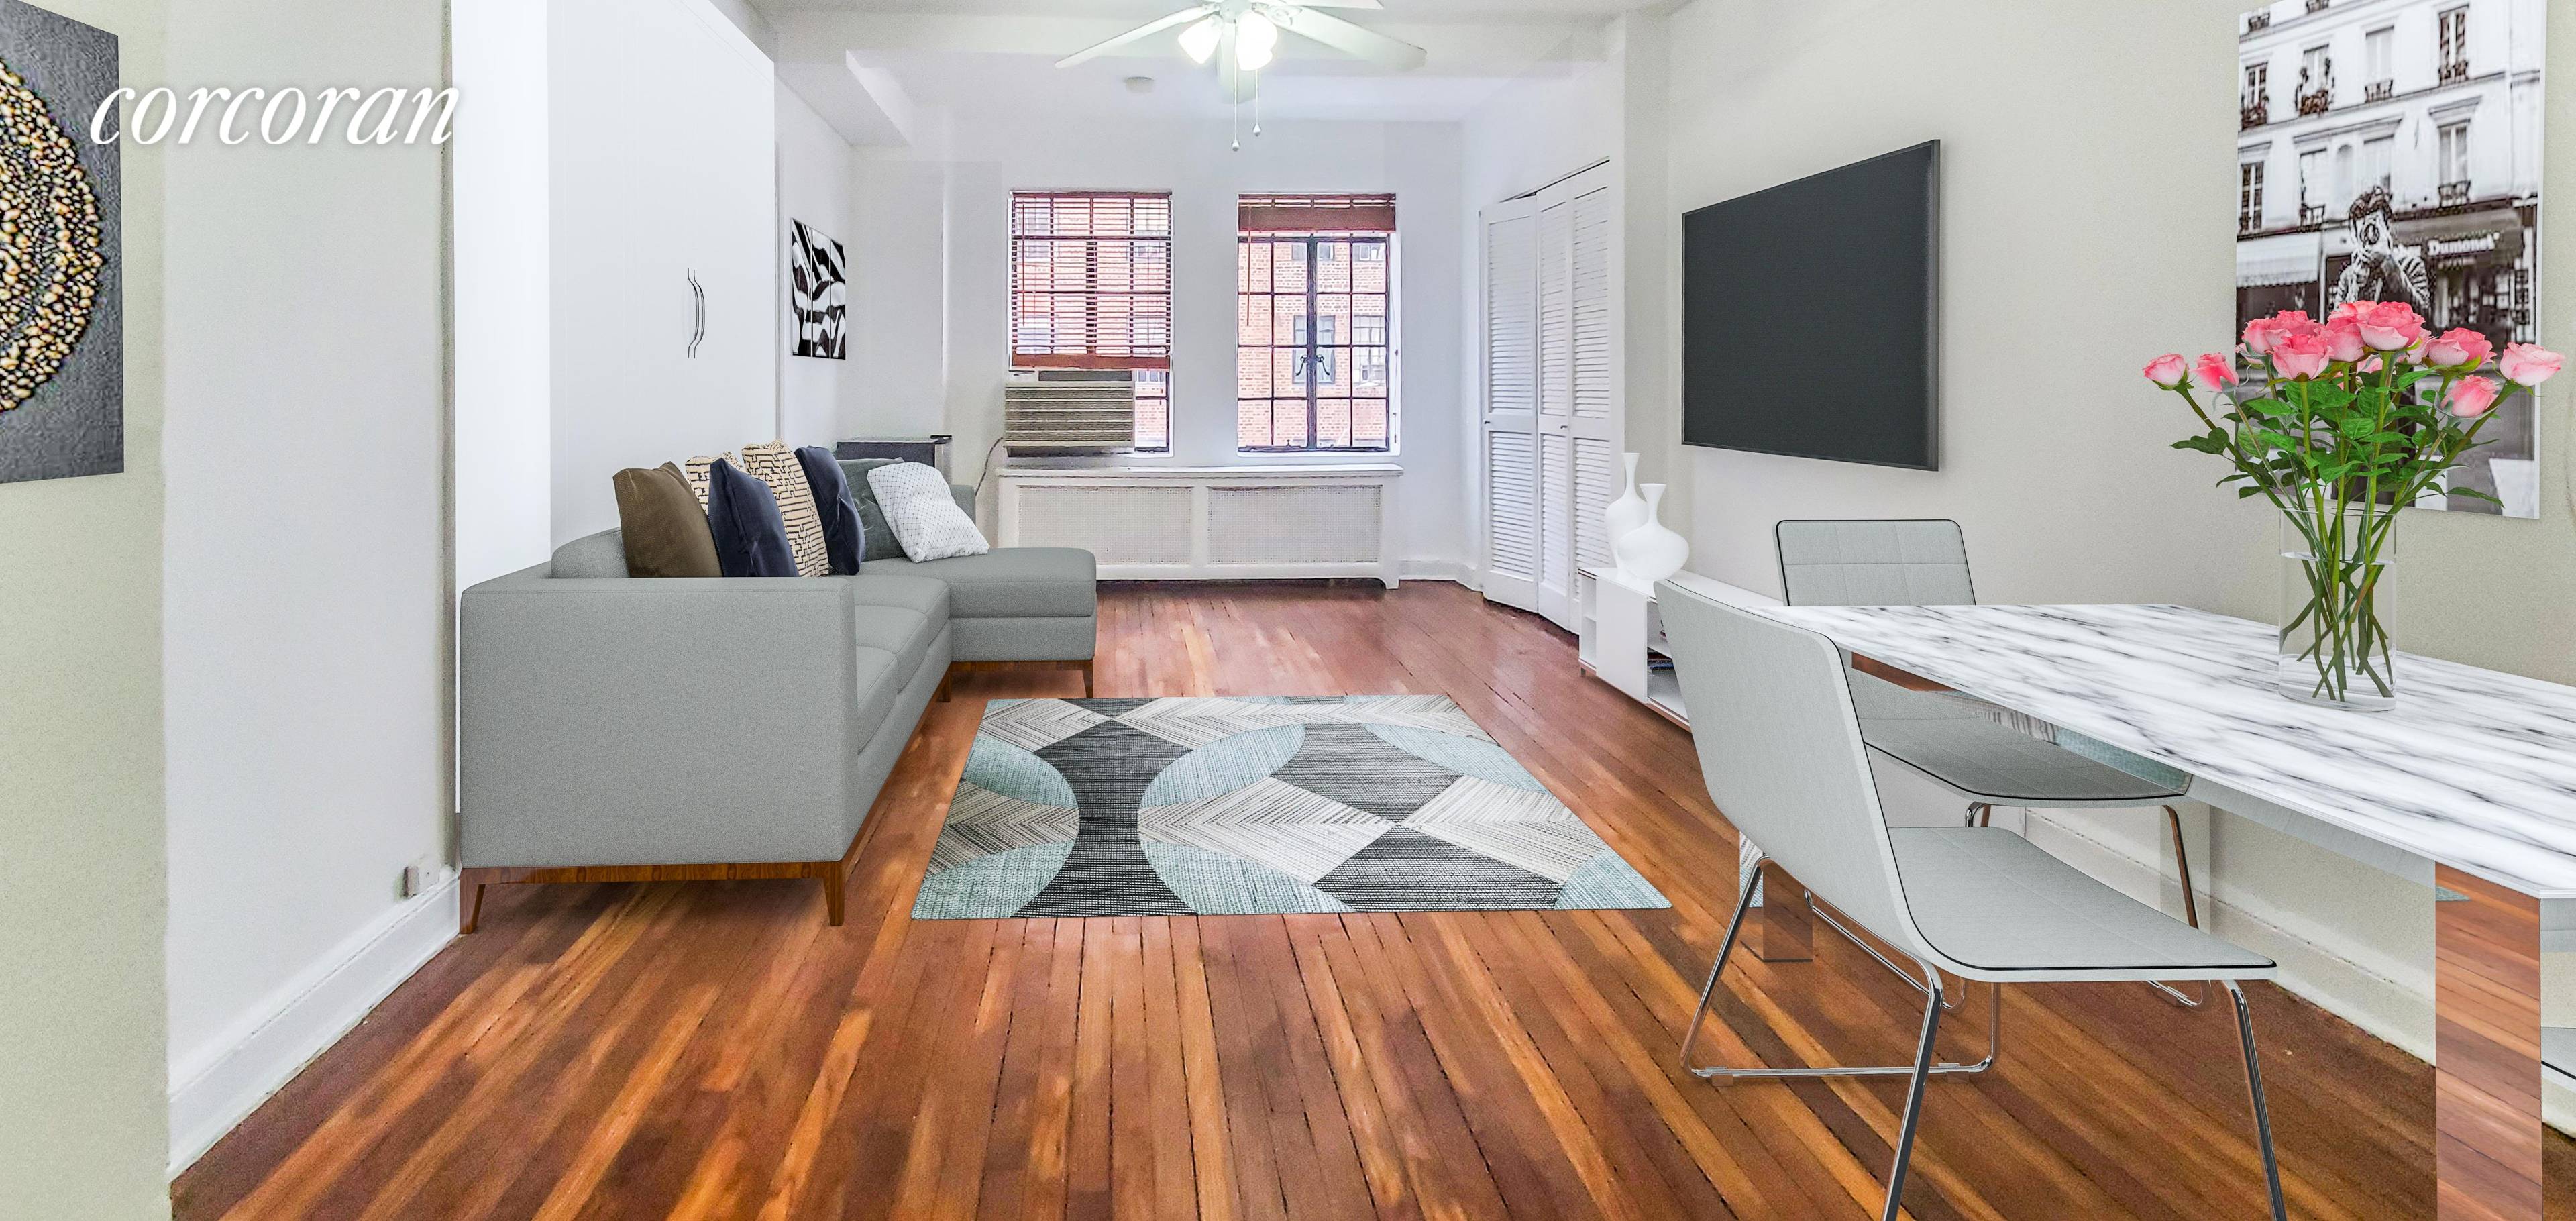 This charming prewar studio features high beamed ceilings, hardwood floors, good closet space, a kitchenette with dishwasher, and a pristine tile bathroom.